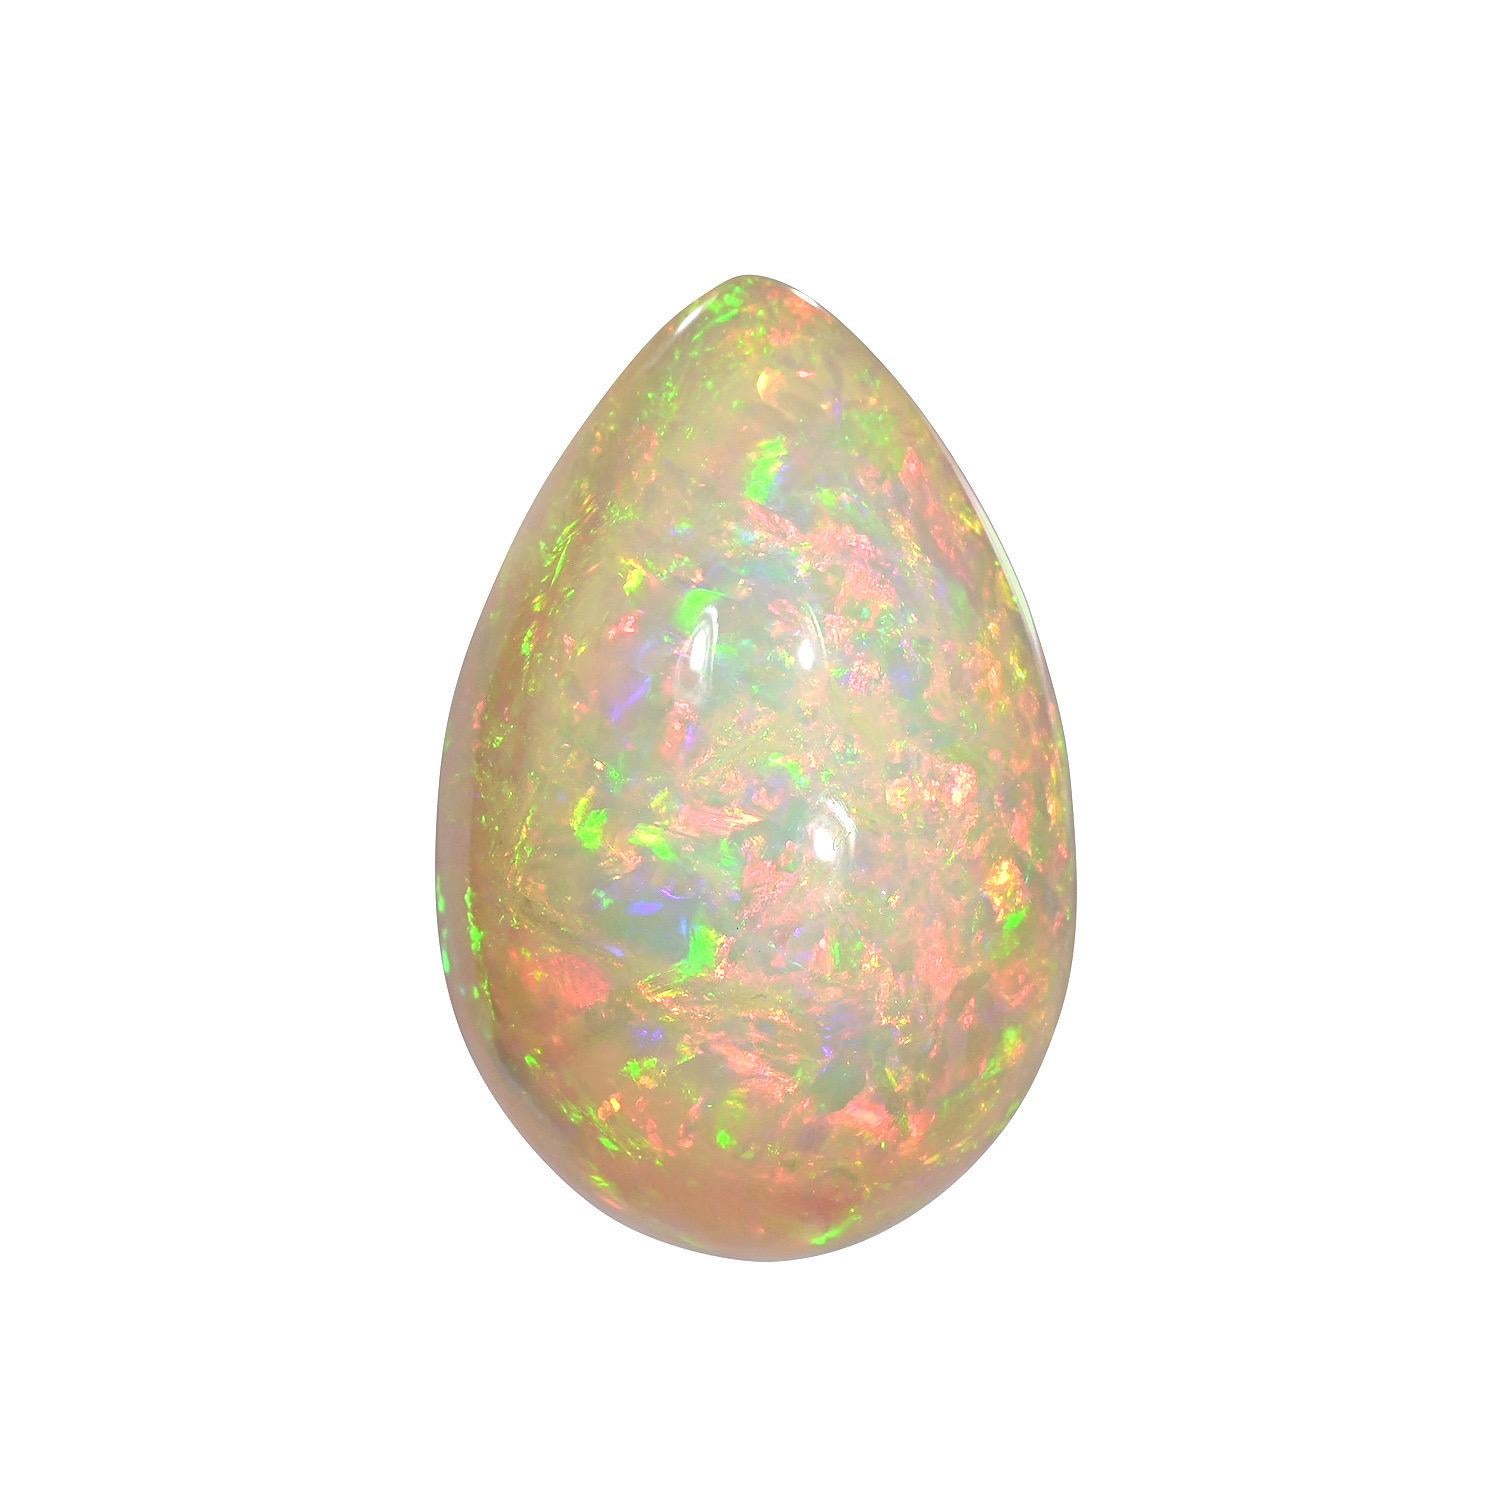 Contemporary Opal Stone 27.63 Carat Natural Ethiopian Pear Shape loose Gemstone For Sale